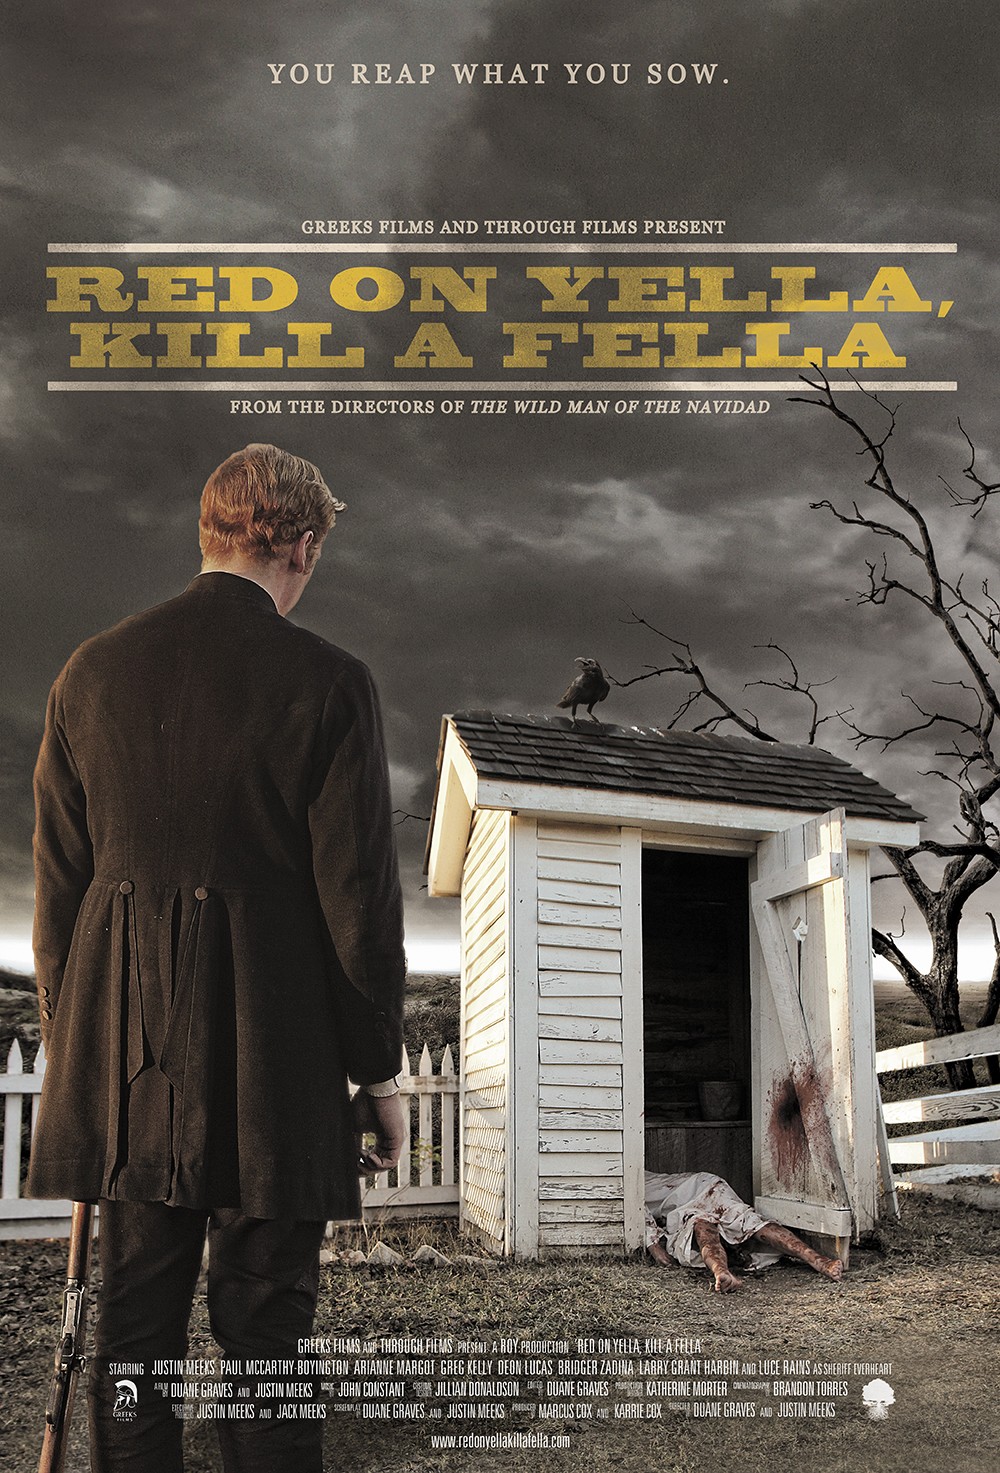 Extra Large Movie Poster Image for Red on Yella, Kill a Fella 